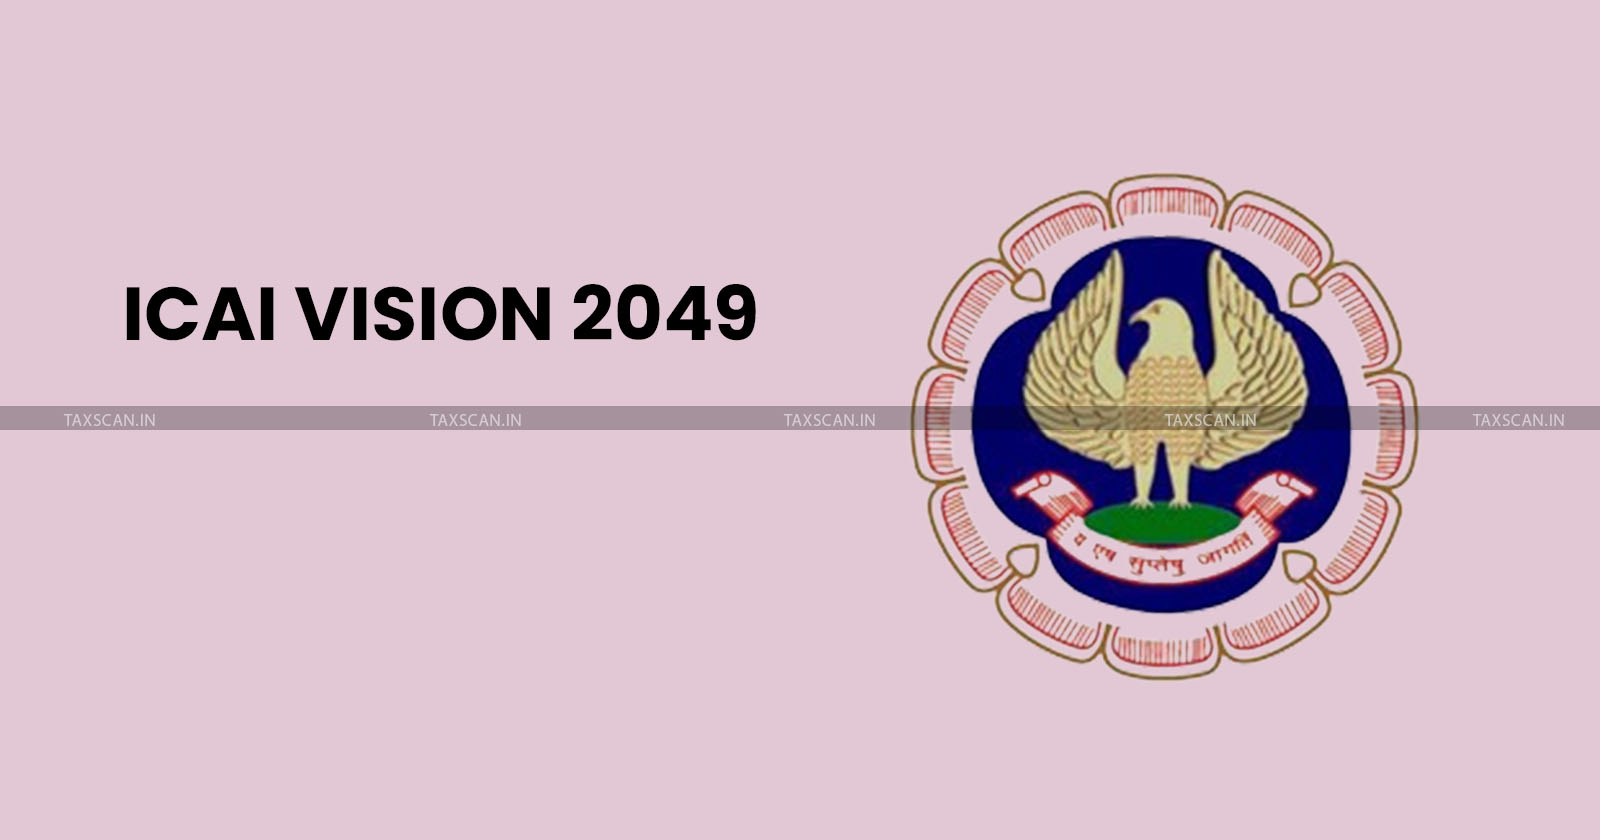 ICAI Vision 2049 - Institute of Chartered Accountants of India - TAXSCAN